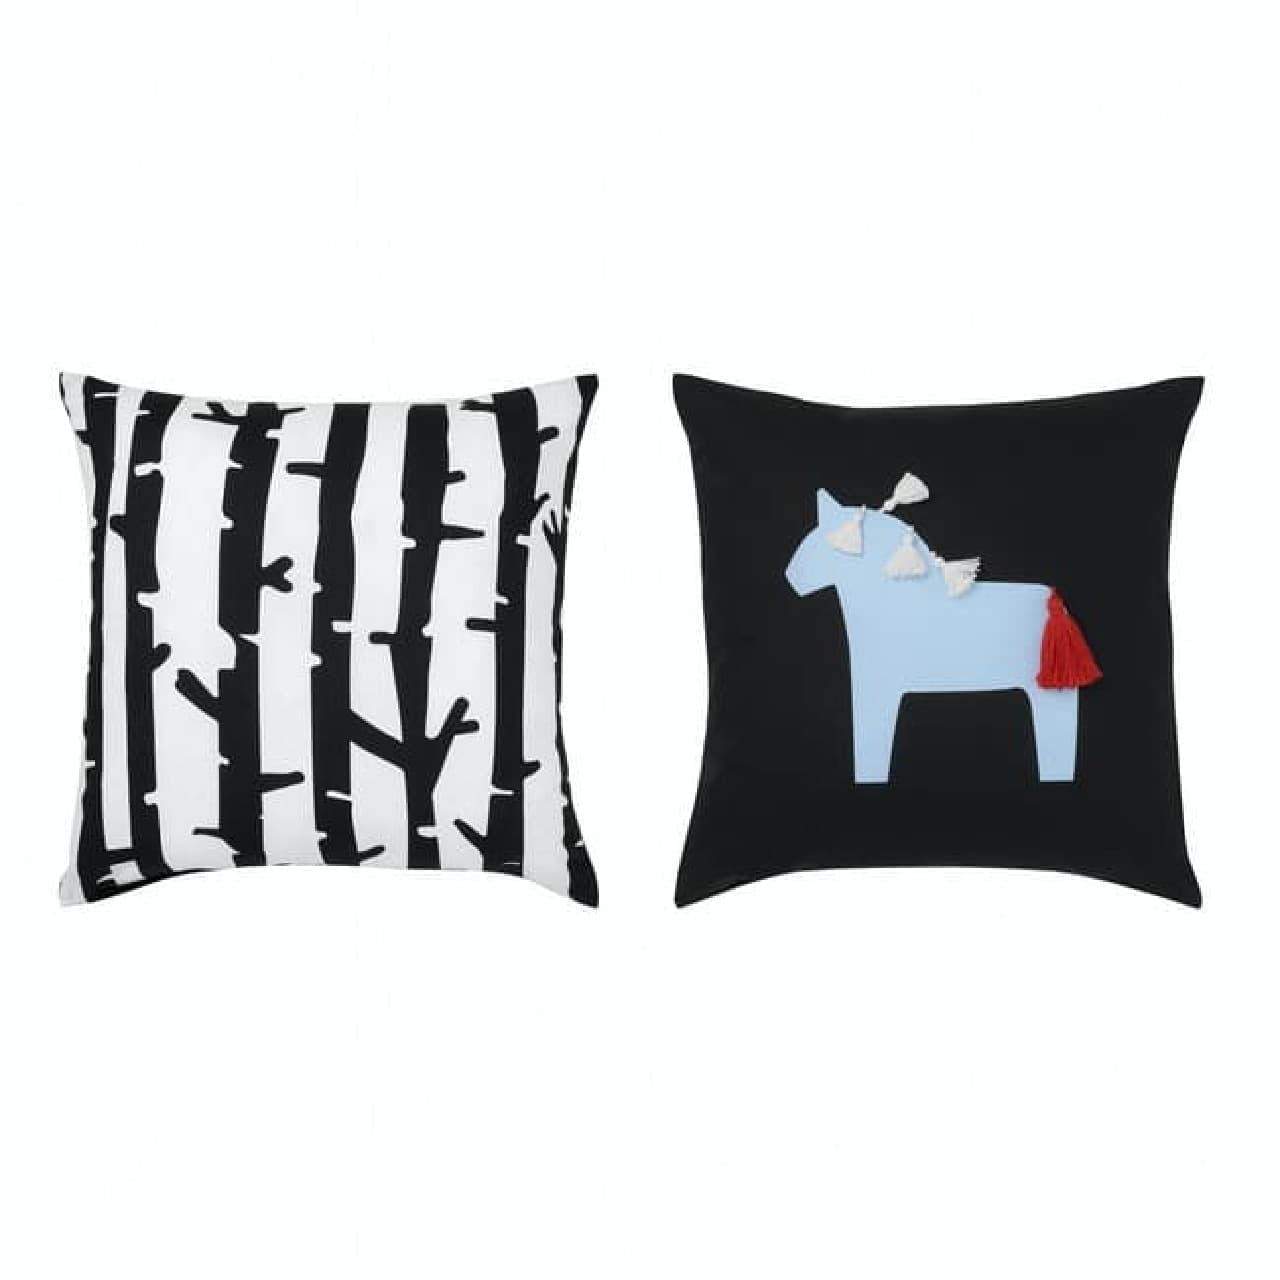 Ikea Hestage Collection -- Freezer bags, mugs, cushions, etc. with cute horse motifs